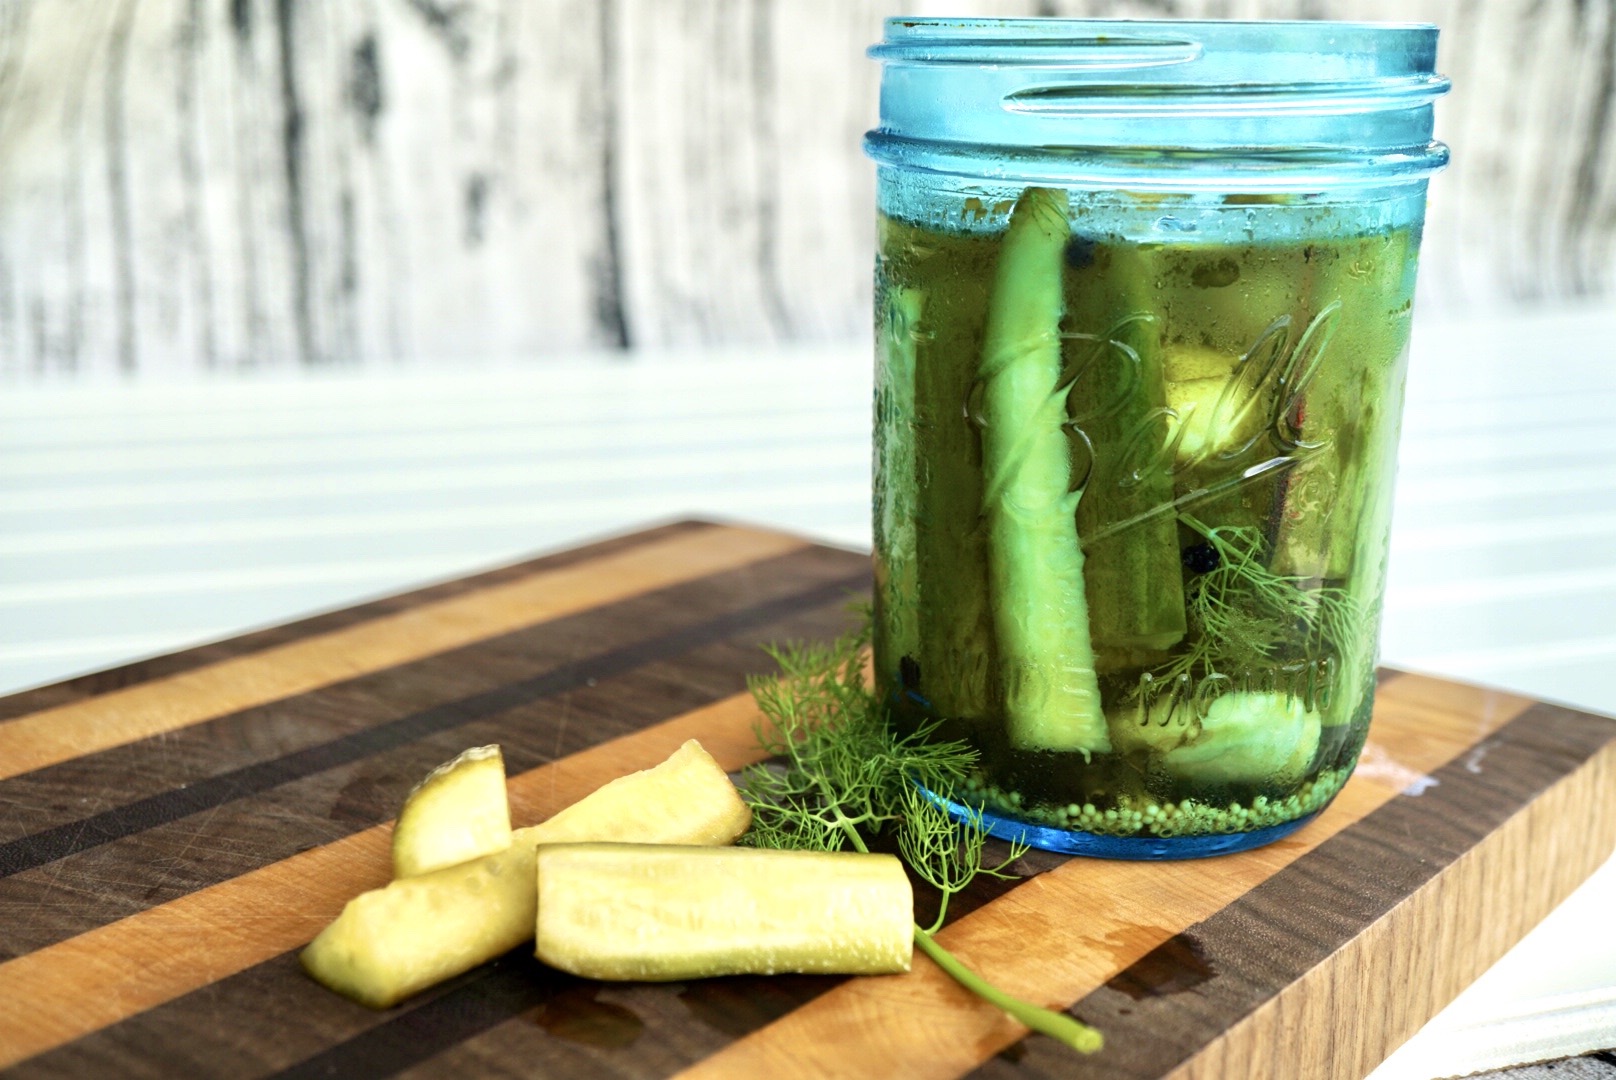 Smoked Quick Pickles